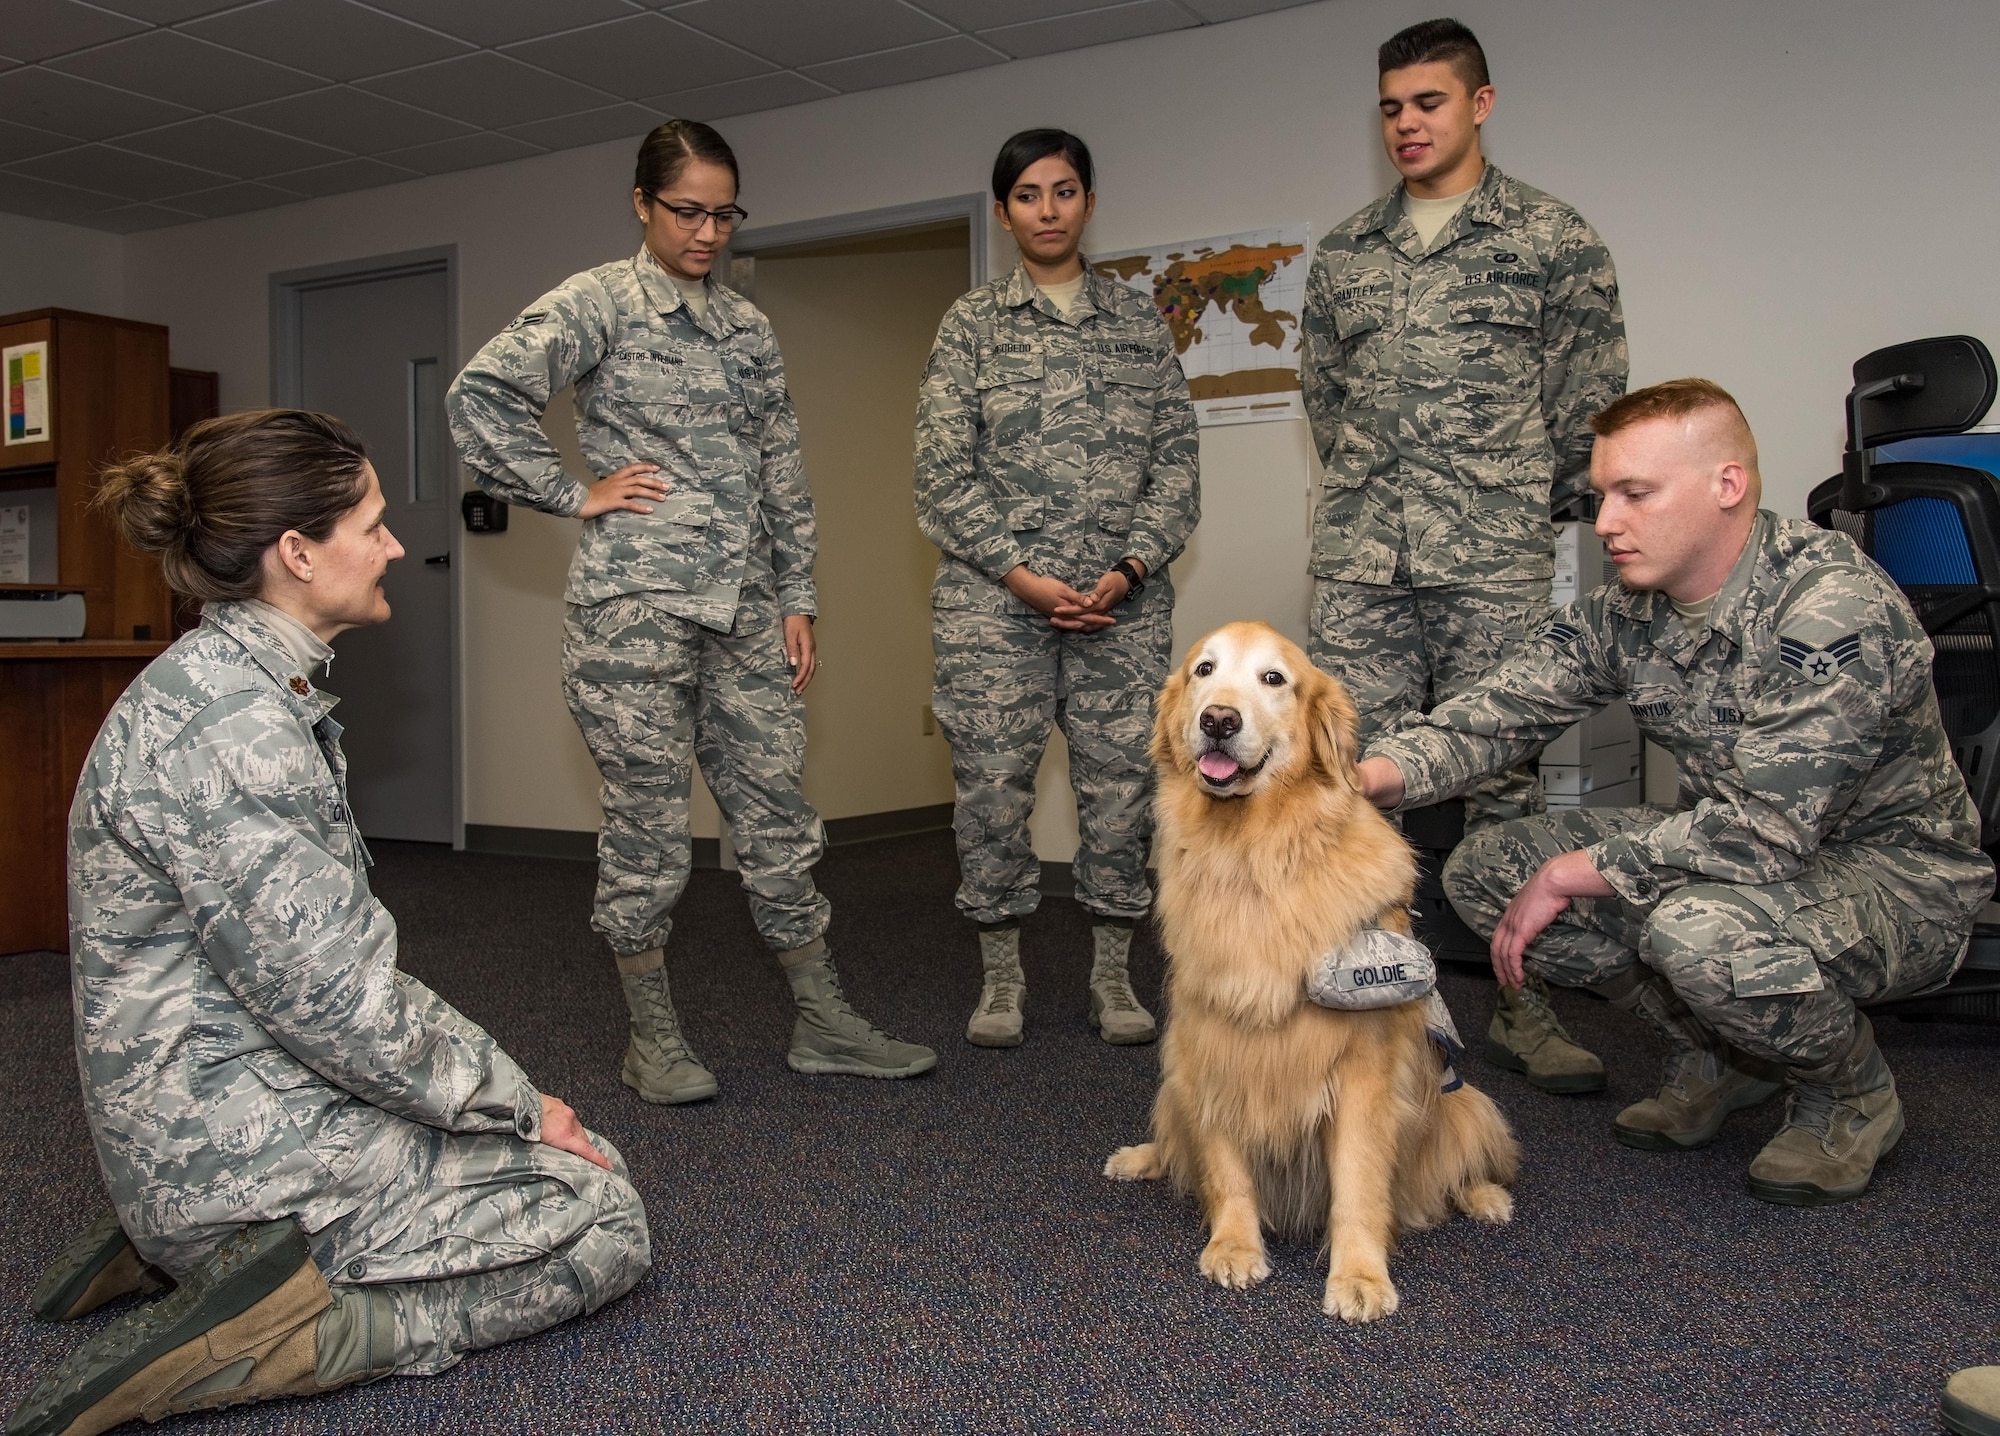 Maj. Regina Owen, 436th Medical Operations Squadron psychiatric mental health nurse practitioner, introduces Lt. Col. Goldie, a nine-year-old Golden Retriever therapy dog stationed at Walter Reed National Military Medical Center, Bethesda, Md., to members of the 436th Comptroller Squadron, Oct. 19, 2017, on Dover Air Force Base, Del. As part of Family Advocacy’s outreach during Domestic Violence Awareness Month, Owen escorted Goldie around the base to meet with Team Dover personnel during his temporary duty assignment to Dover. (U.S. Air Force photo by Roland Balik)